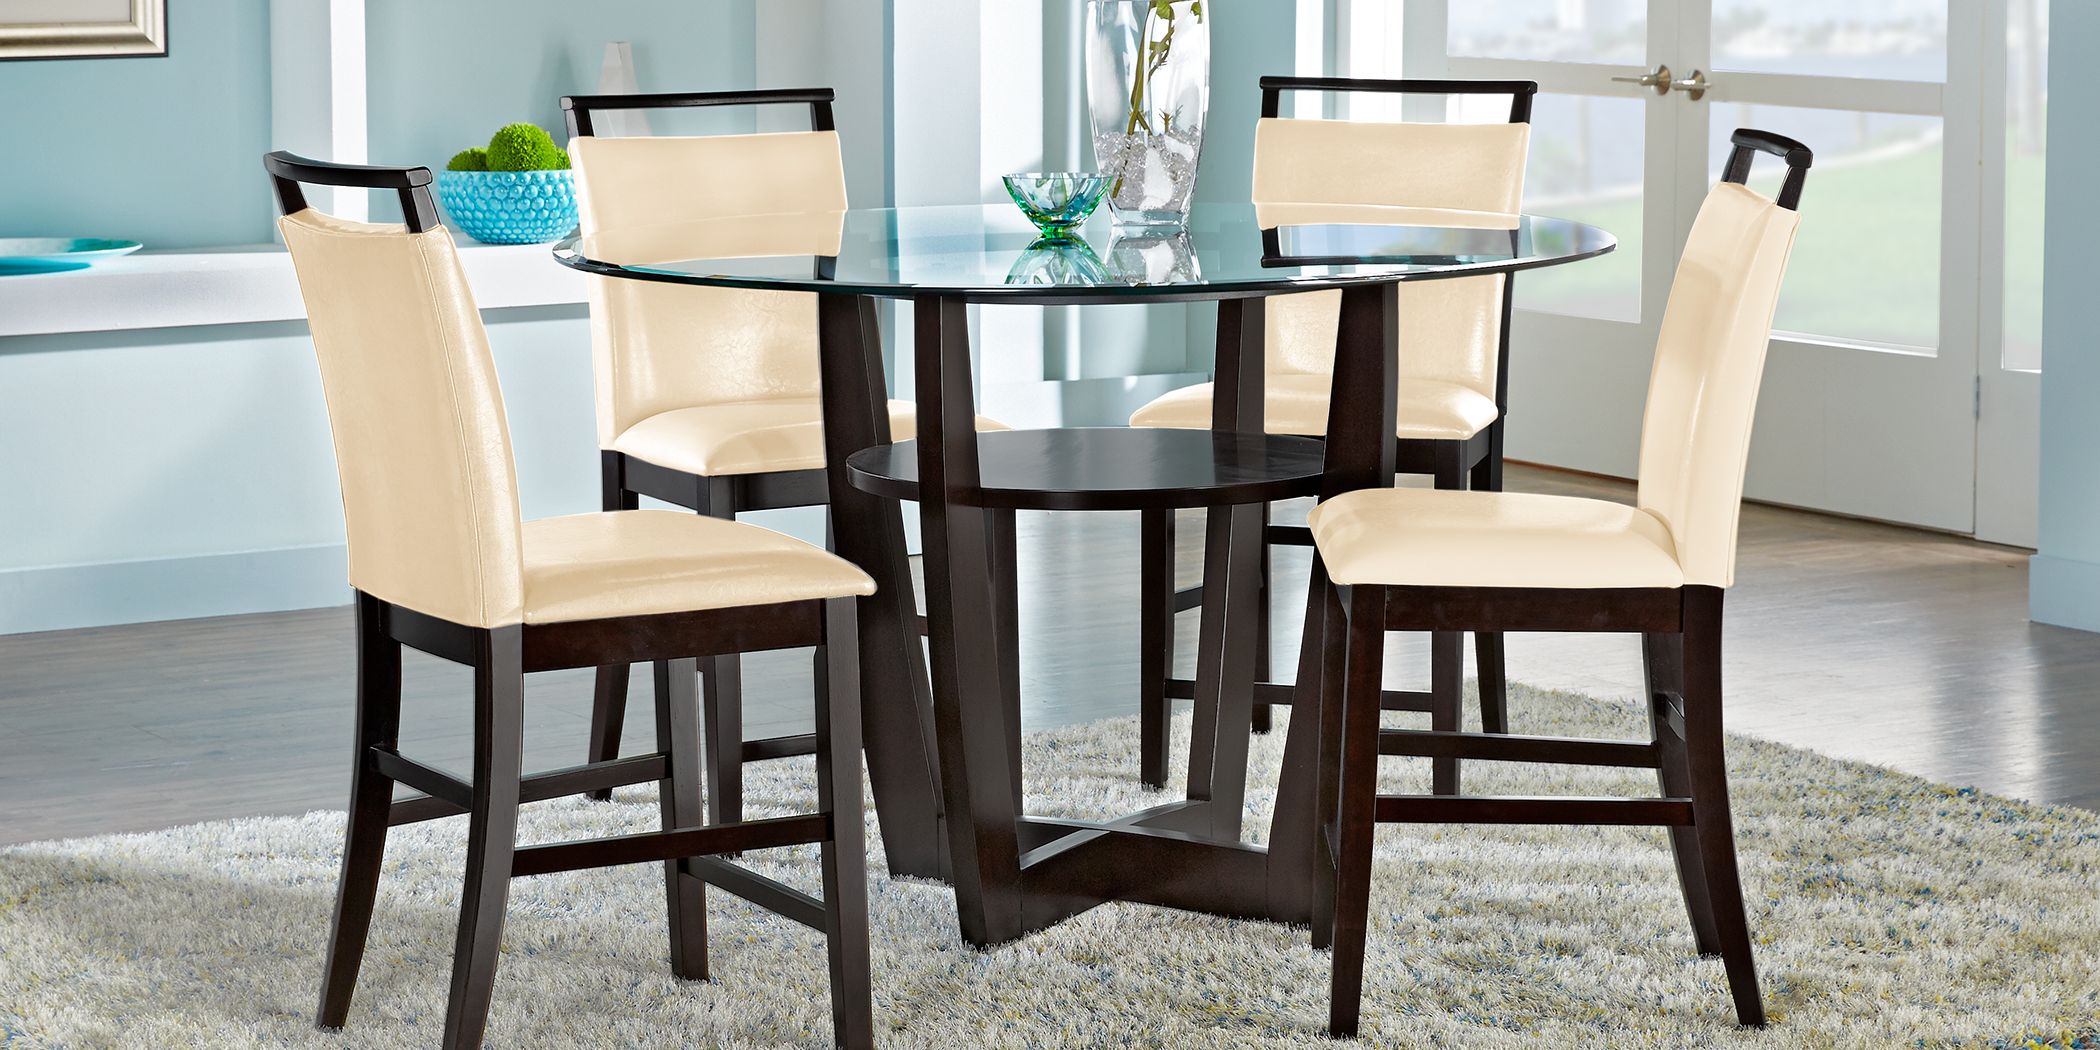 Counter Height Dining Sets, Counter Height Dining Room Table And Chair Sets